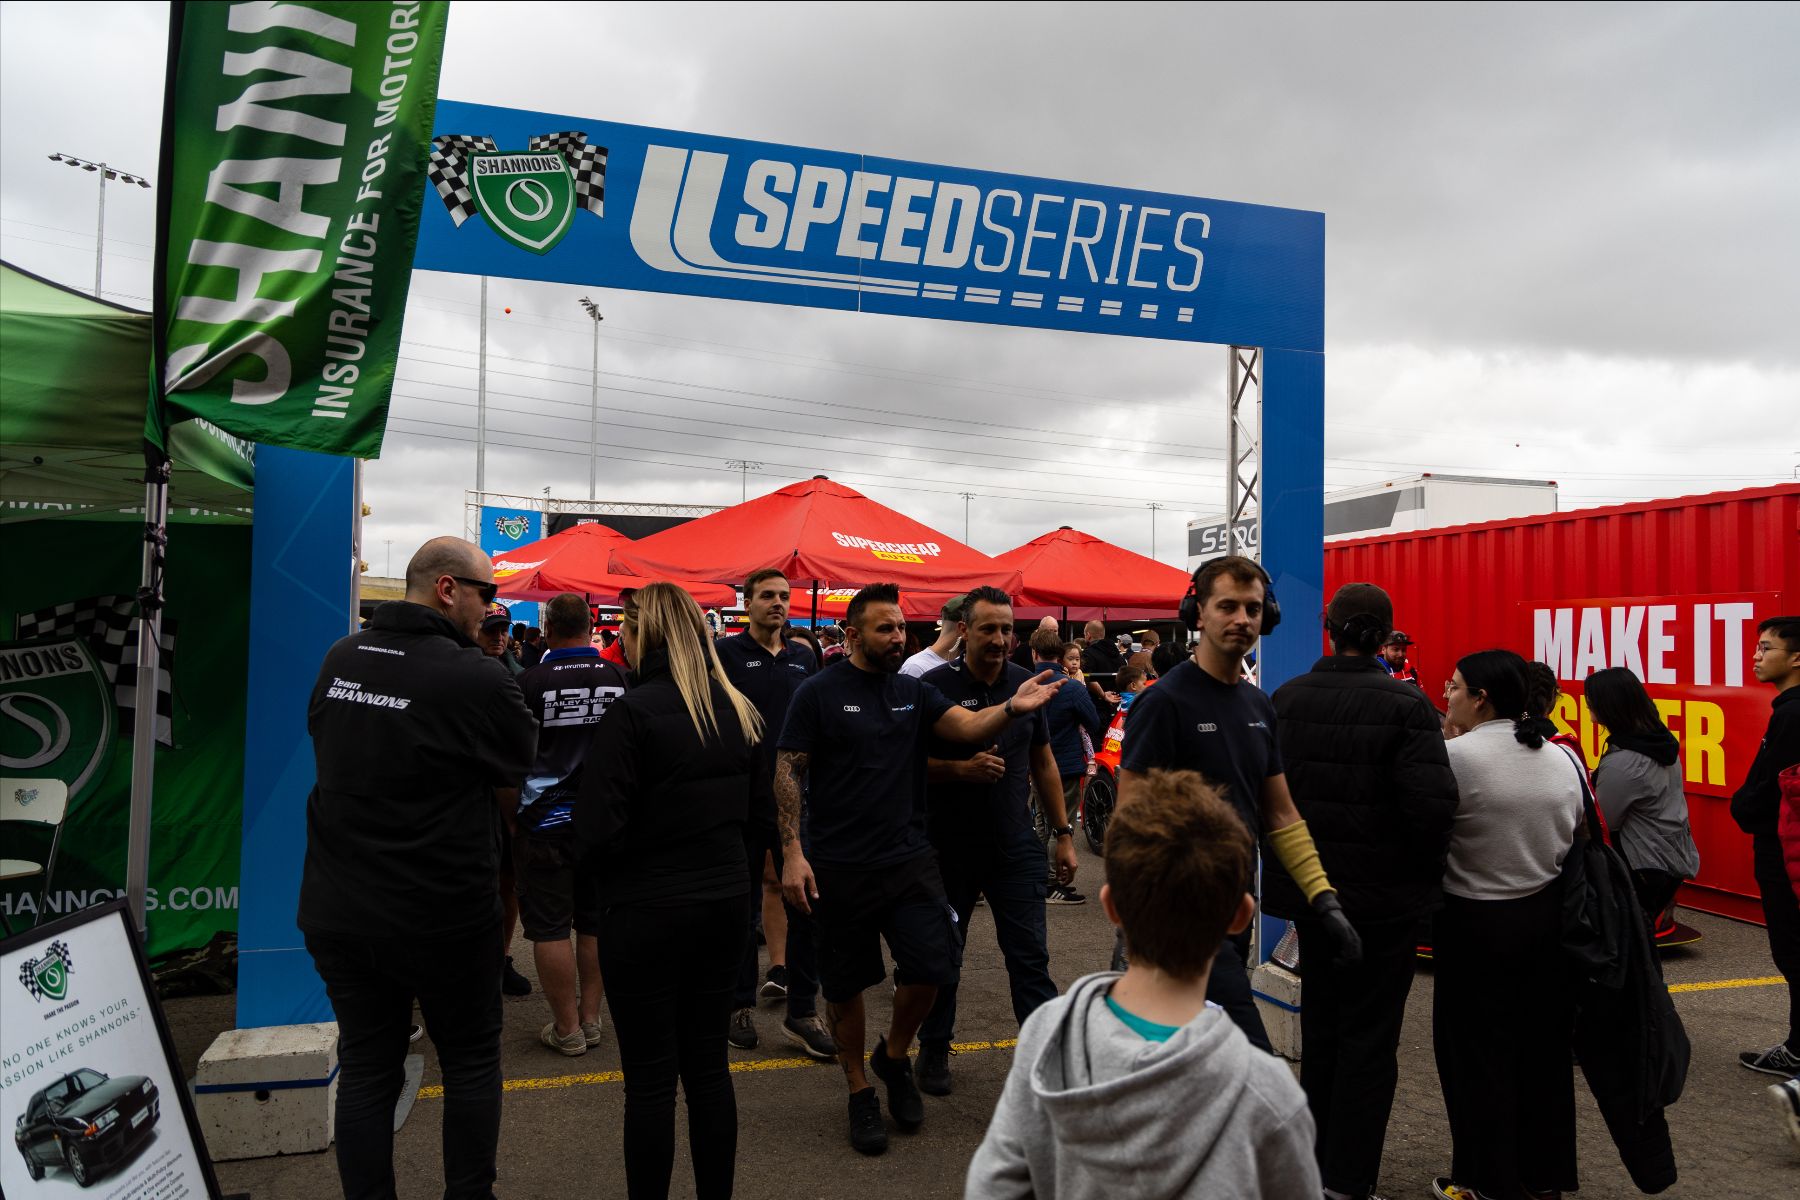 shannons continues longstanding support of speedseries